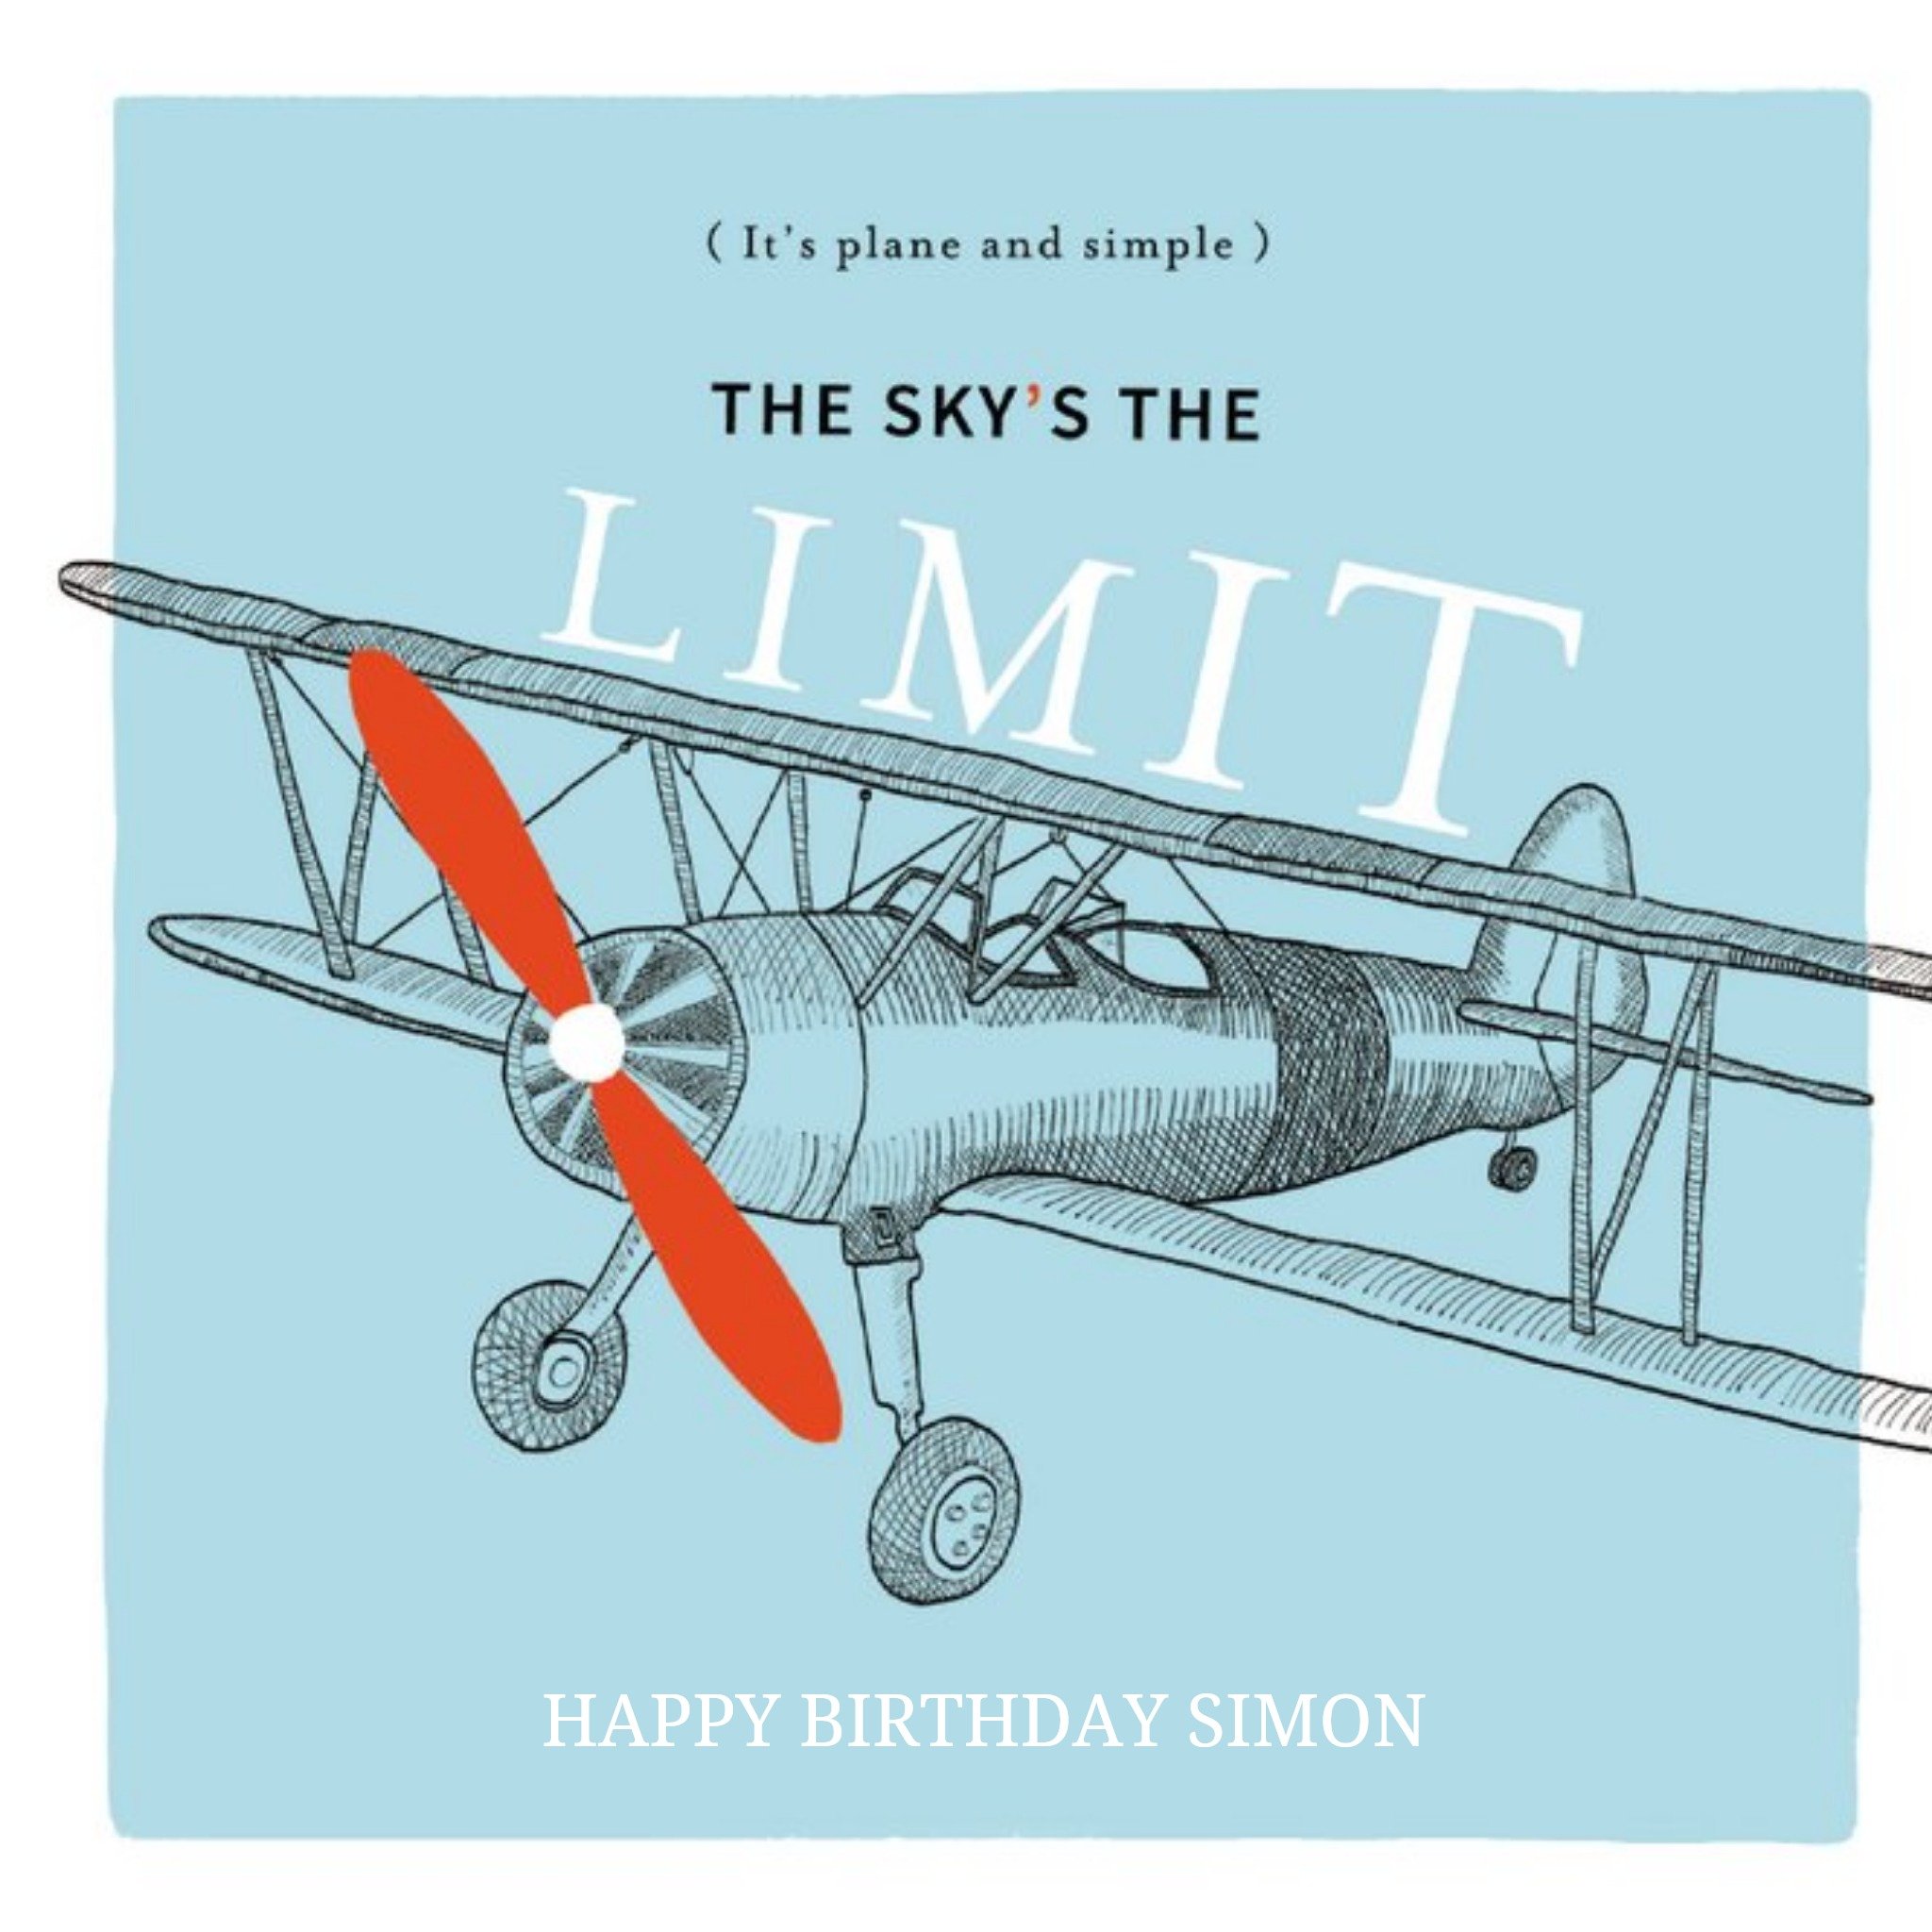 Moonpig Birthday Card - The Sky's The Limit - Plane - Plane And Simple, Square